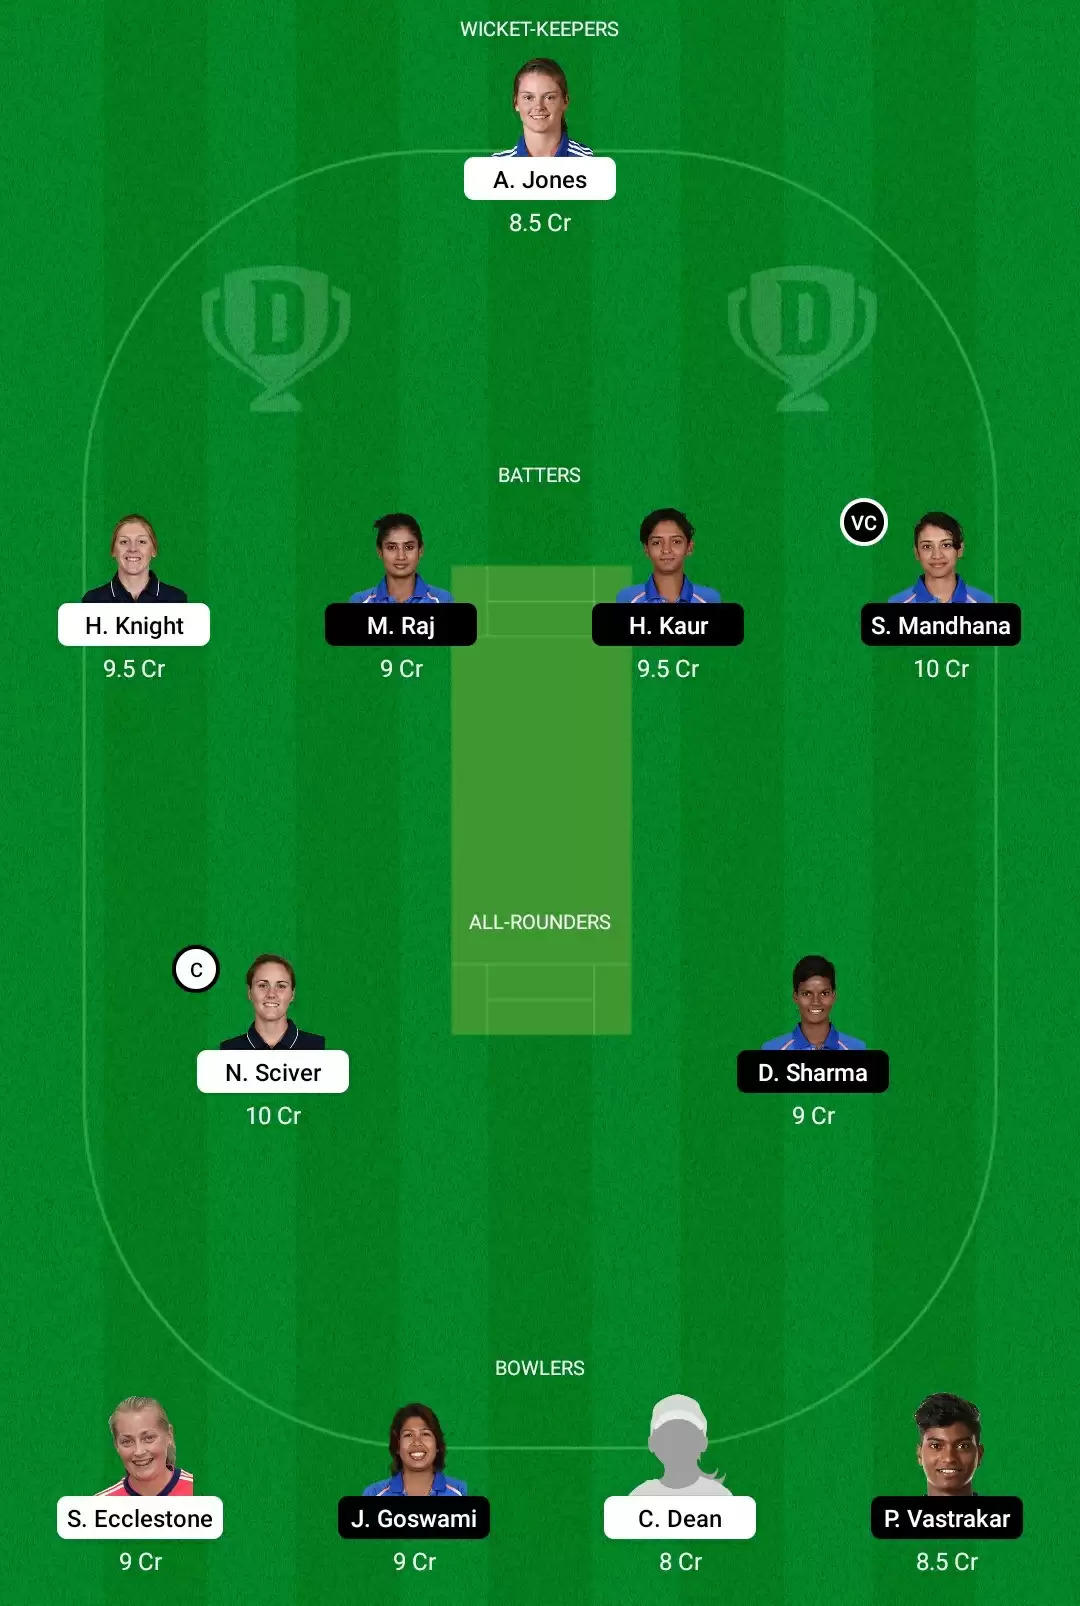 EN-W vs IN-W Dream11 Prediction, Fantasy Cricket Tips, Playing XI, Dream11 Team, Pitch And Weather Report – England Women vs India Women Match, ICC Women’s World Cup 2022